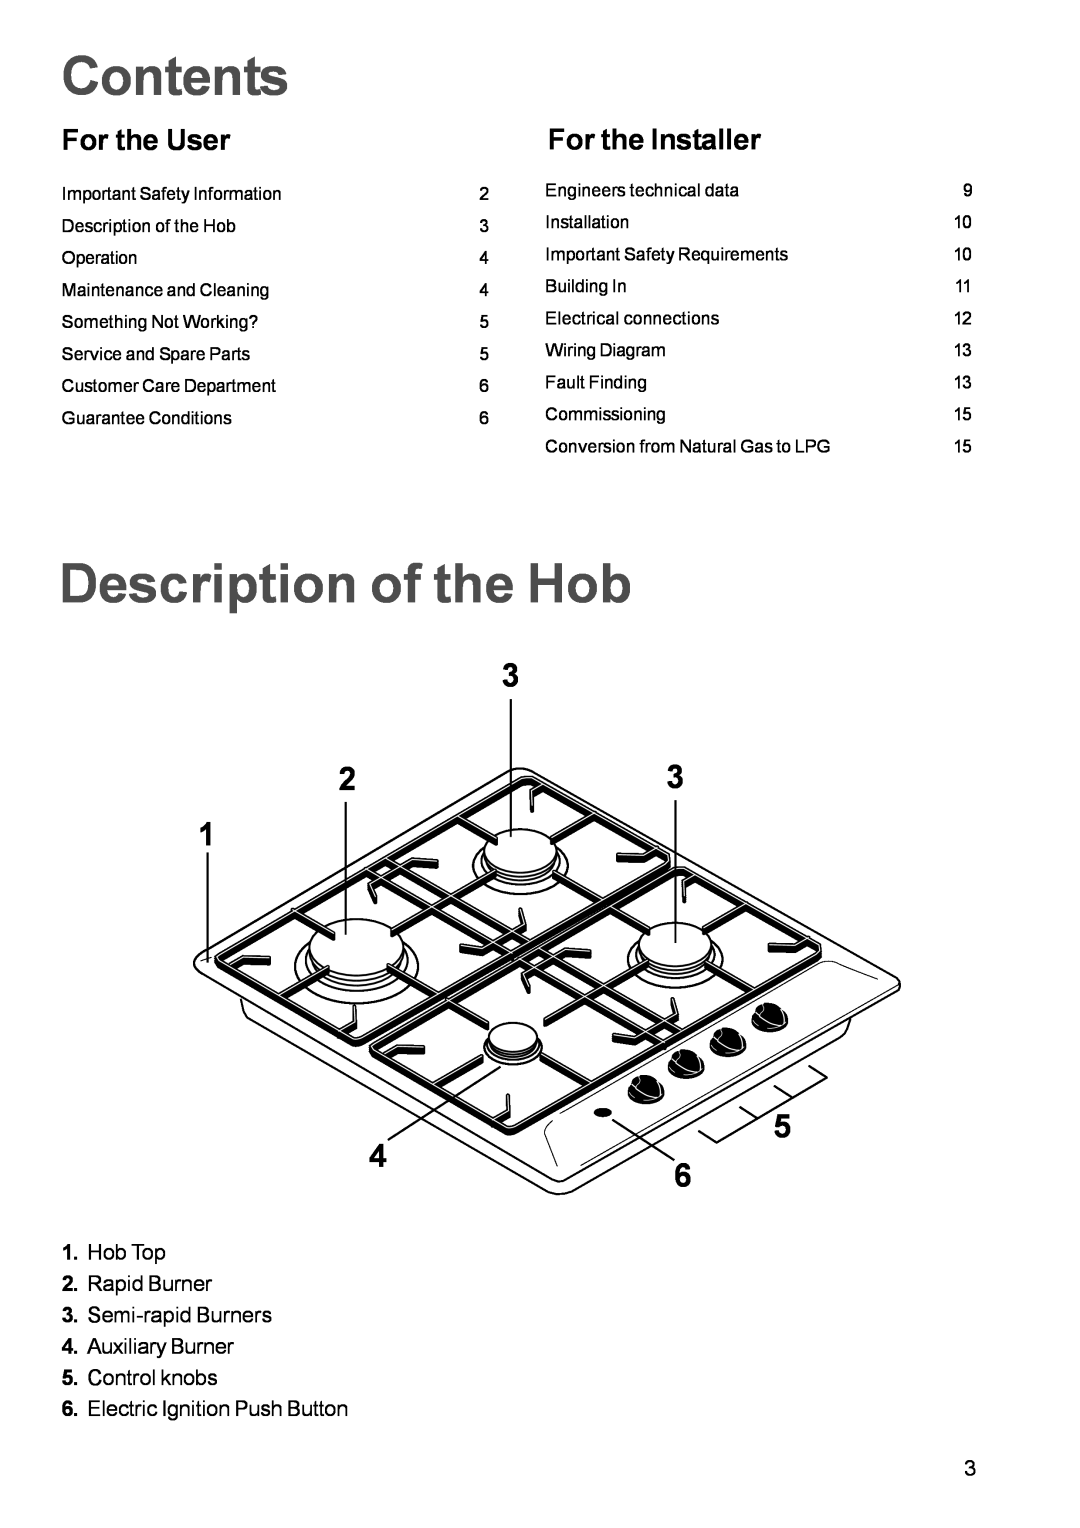 Zanussi ZGL 62 manual Contents, Description of the Hob, For the User, For the Installer, Auxiliary Burner 5.Control knobs 